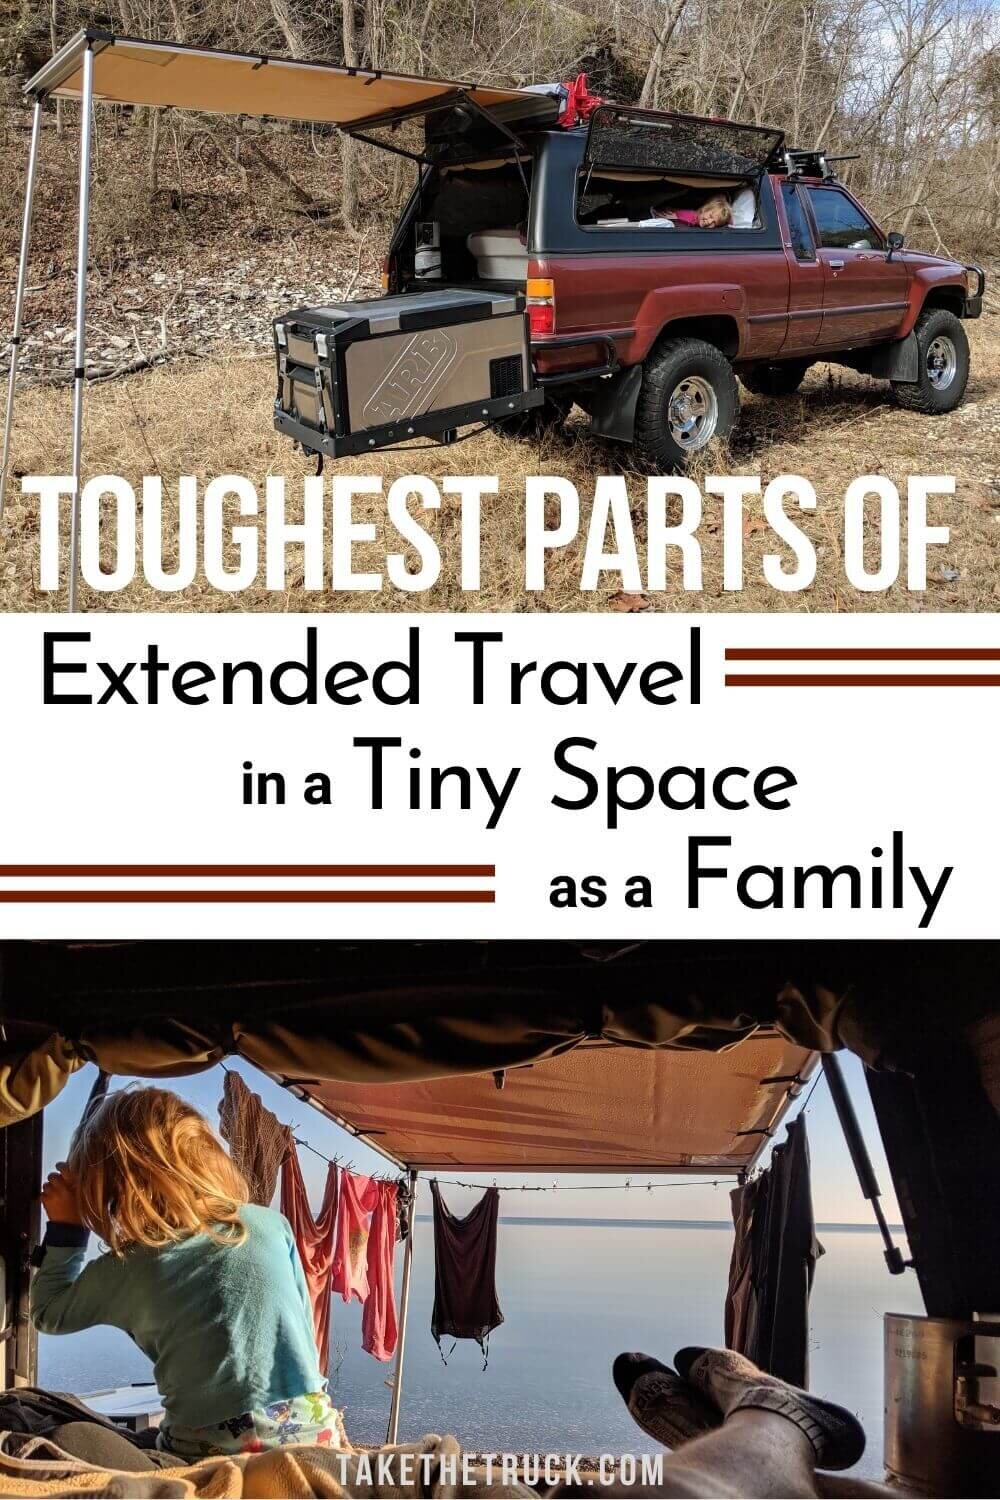 Truck camping as a family brings a lot of joys but also a lot of challenges! This post shares our top 5 struggles when truck bed camping as a family of 3.